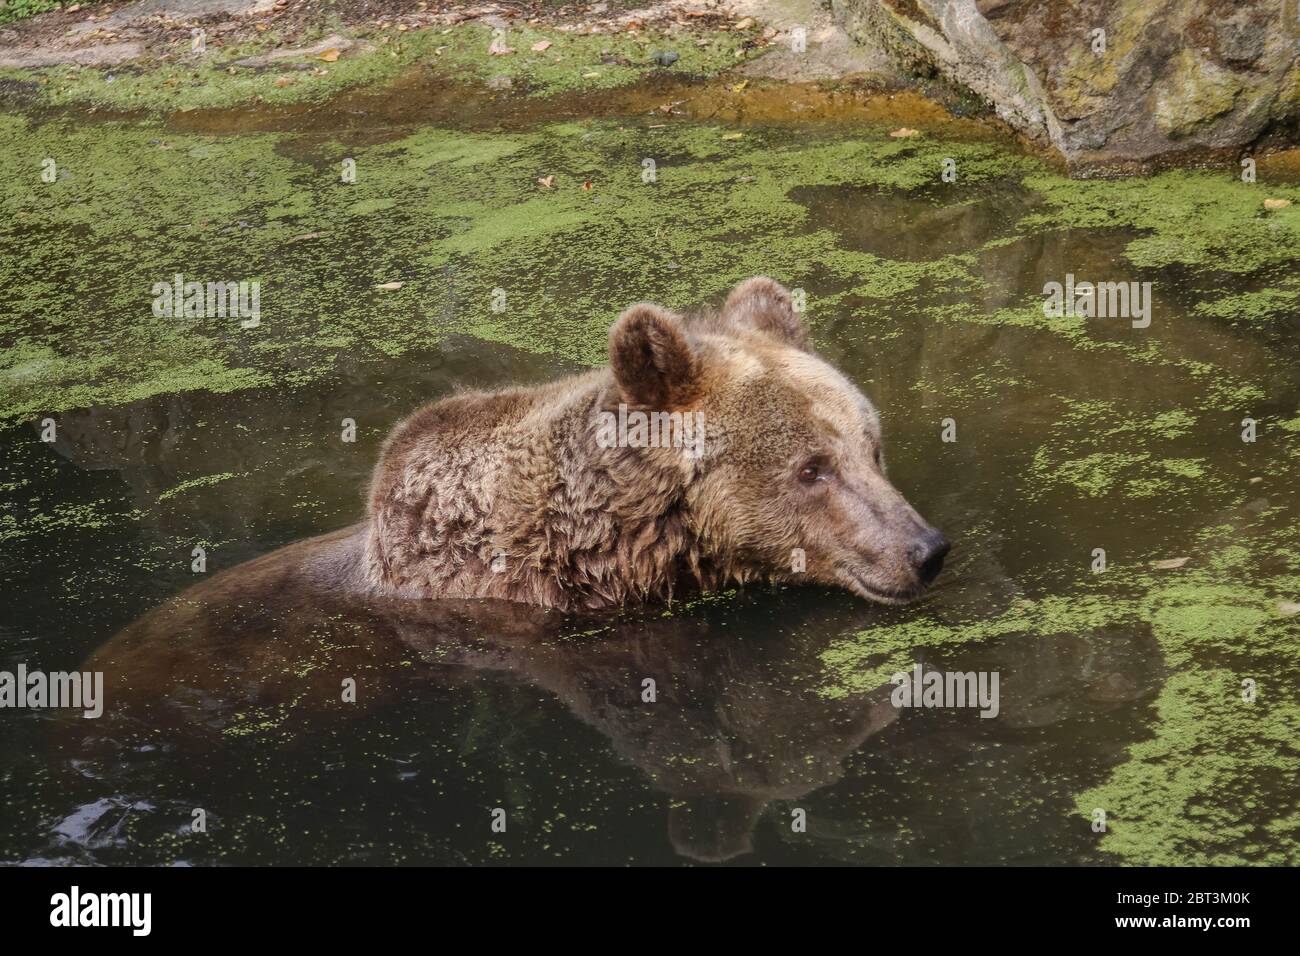 A brown bear swims in dirty water. Reflection of an animal in water Stock Photo